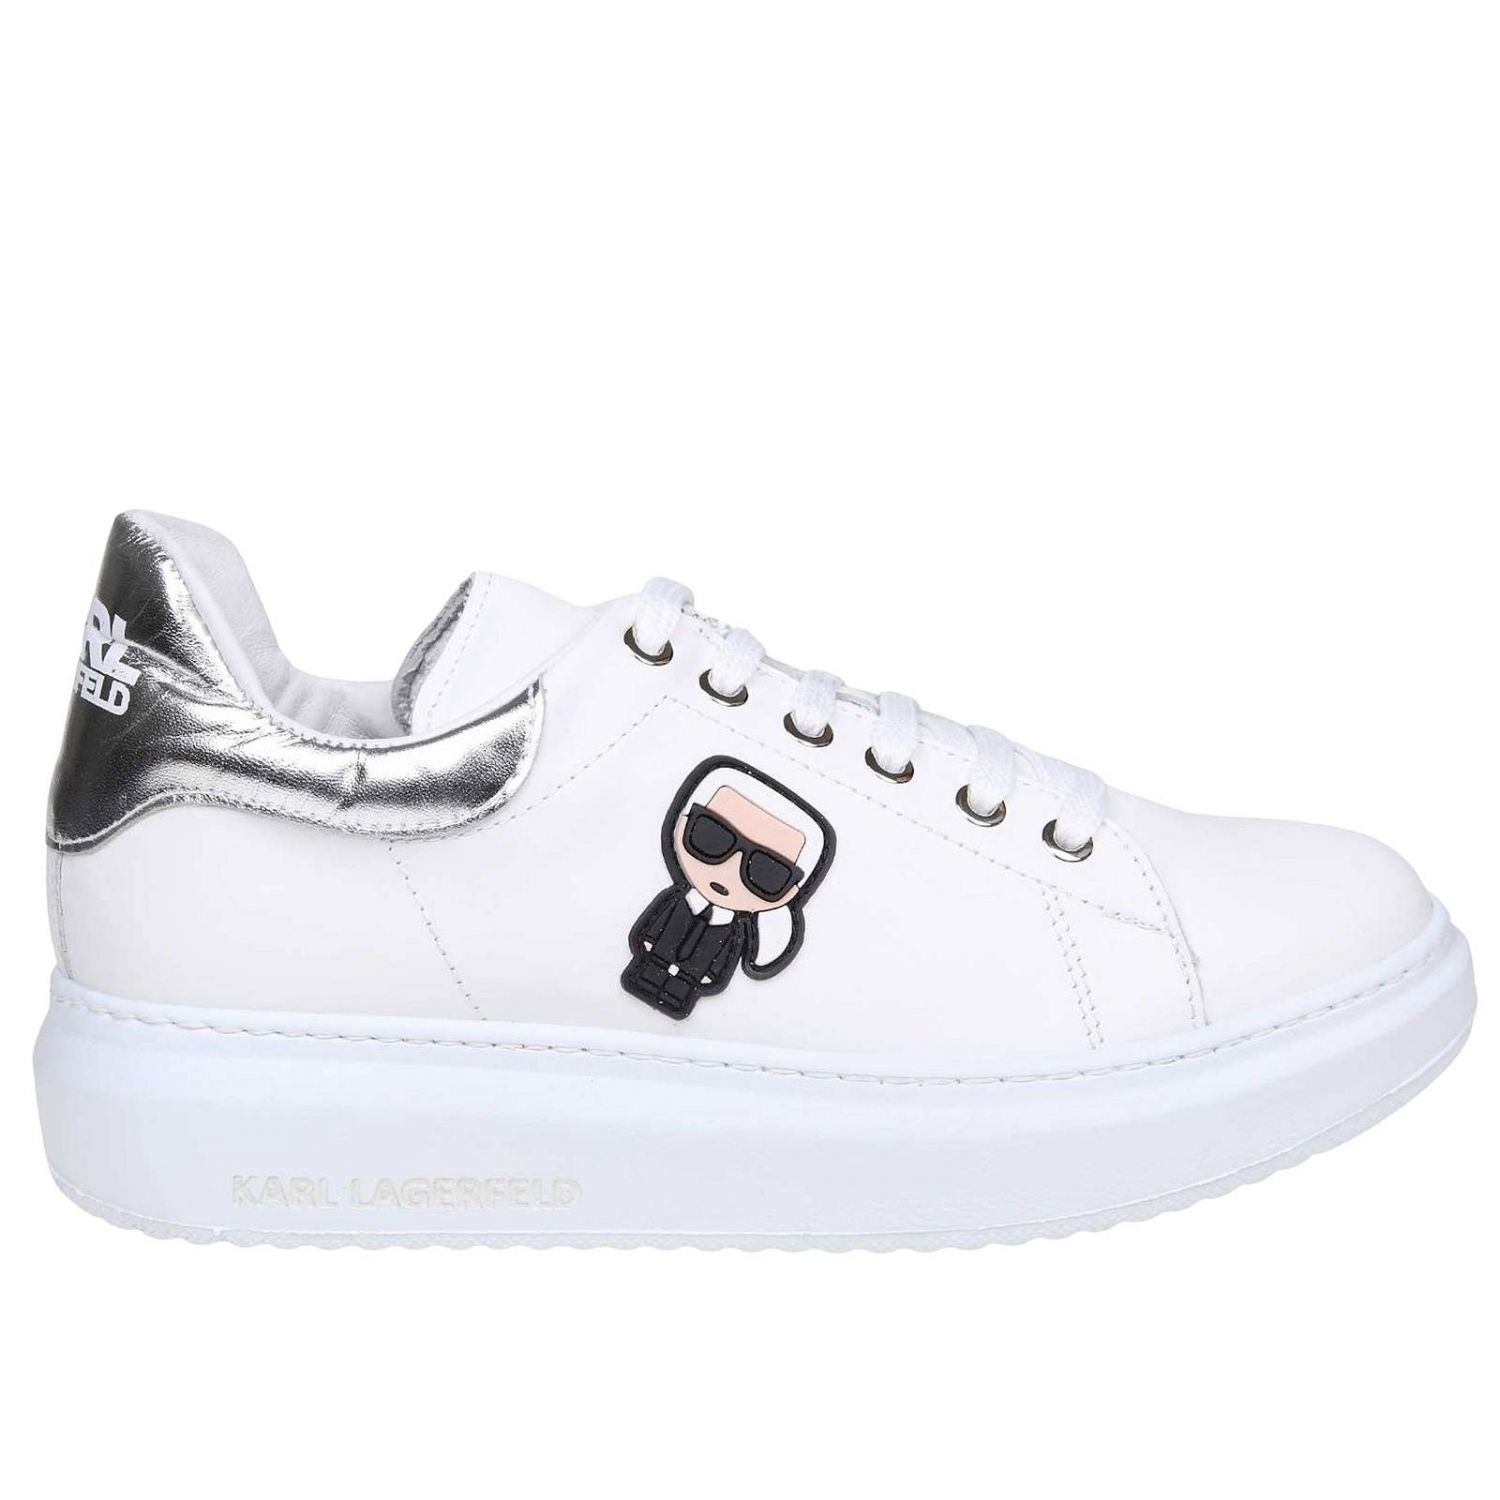 karl lagerfeld sale shoes